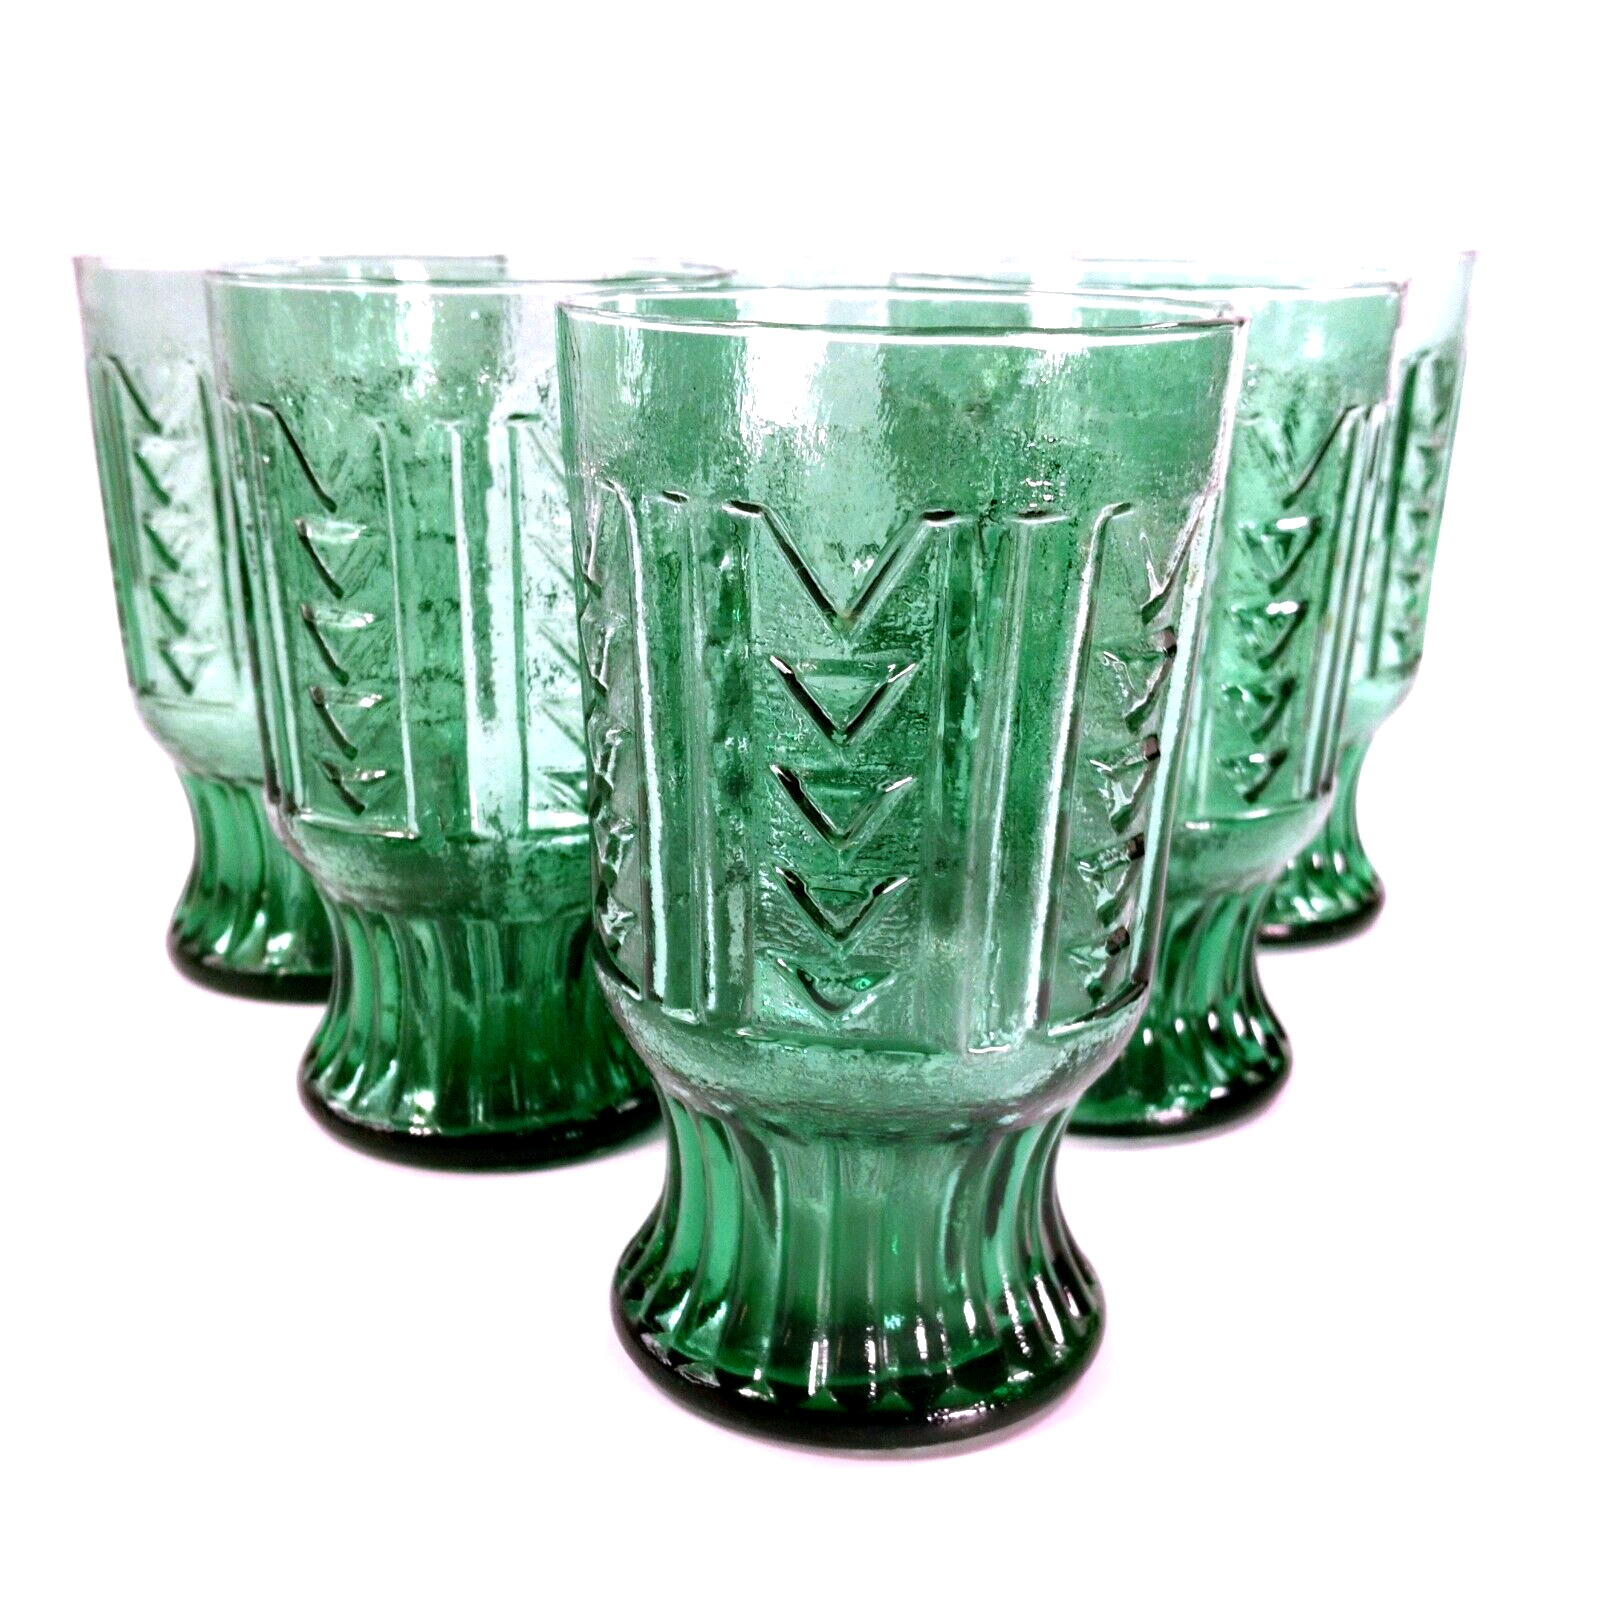 6 Unique 5 Inch Tall Green Tumblers Ribbed Foot Triangle Striped Argyle Pattern